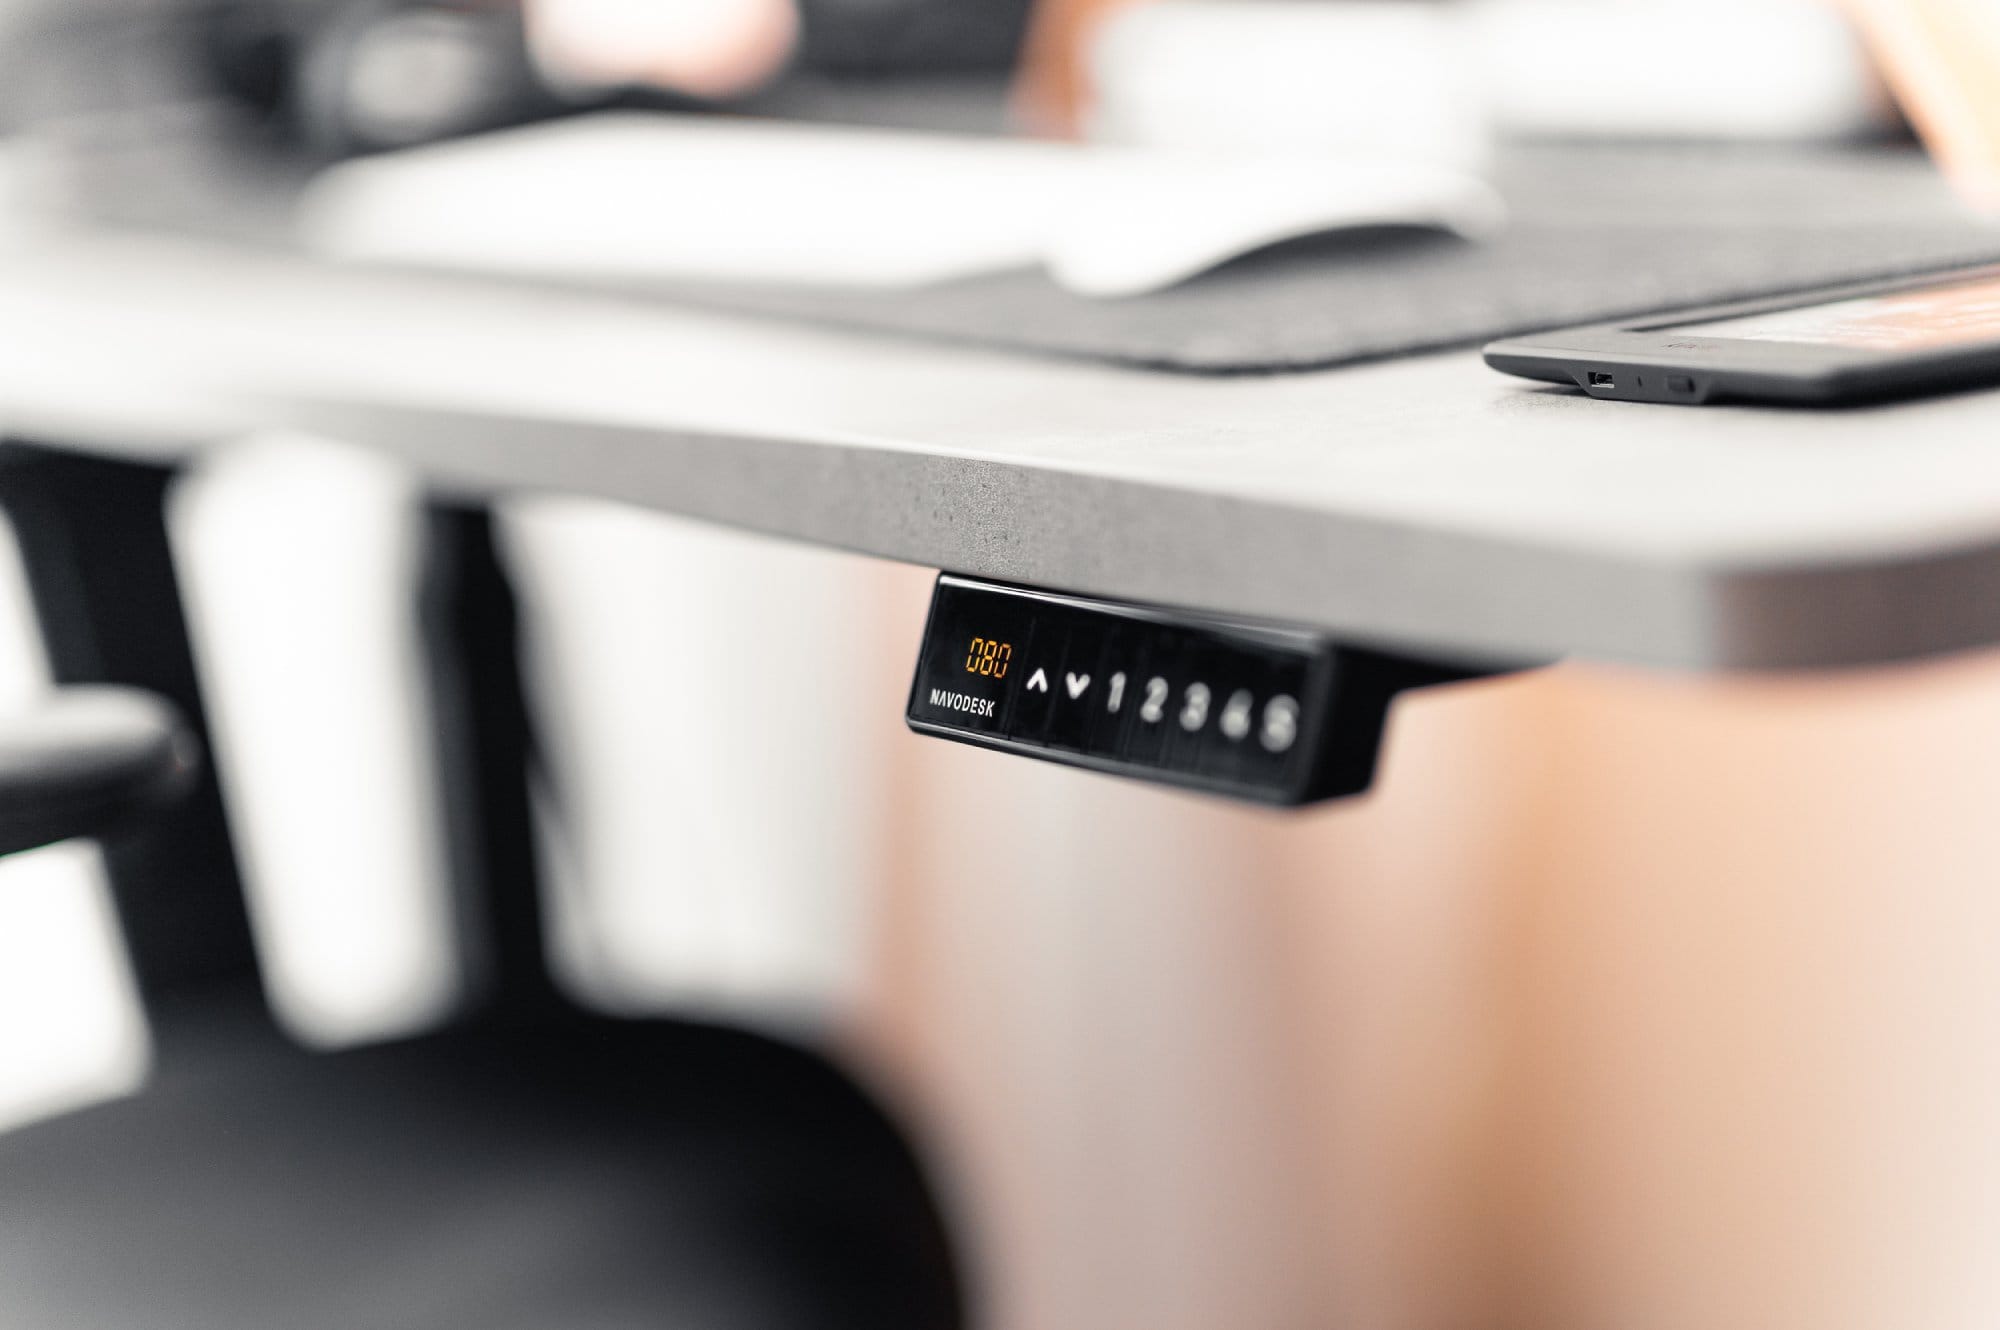  A close-up view of a desk’s edge showing the control panel with height indicators of an adjustable standing desk